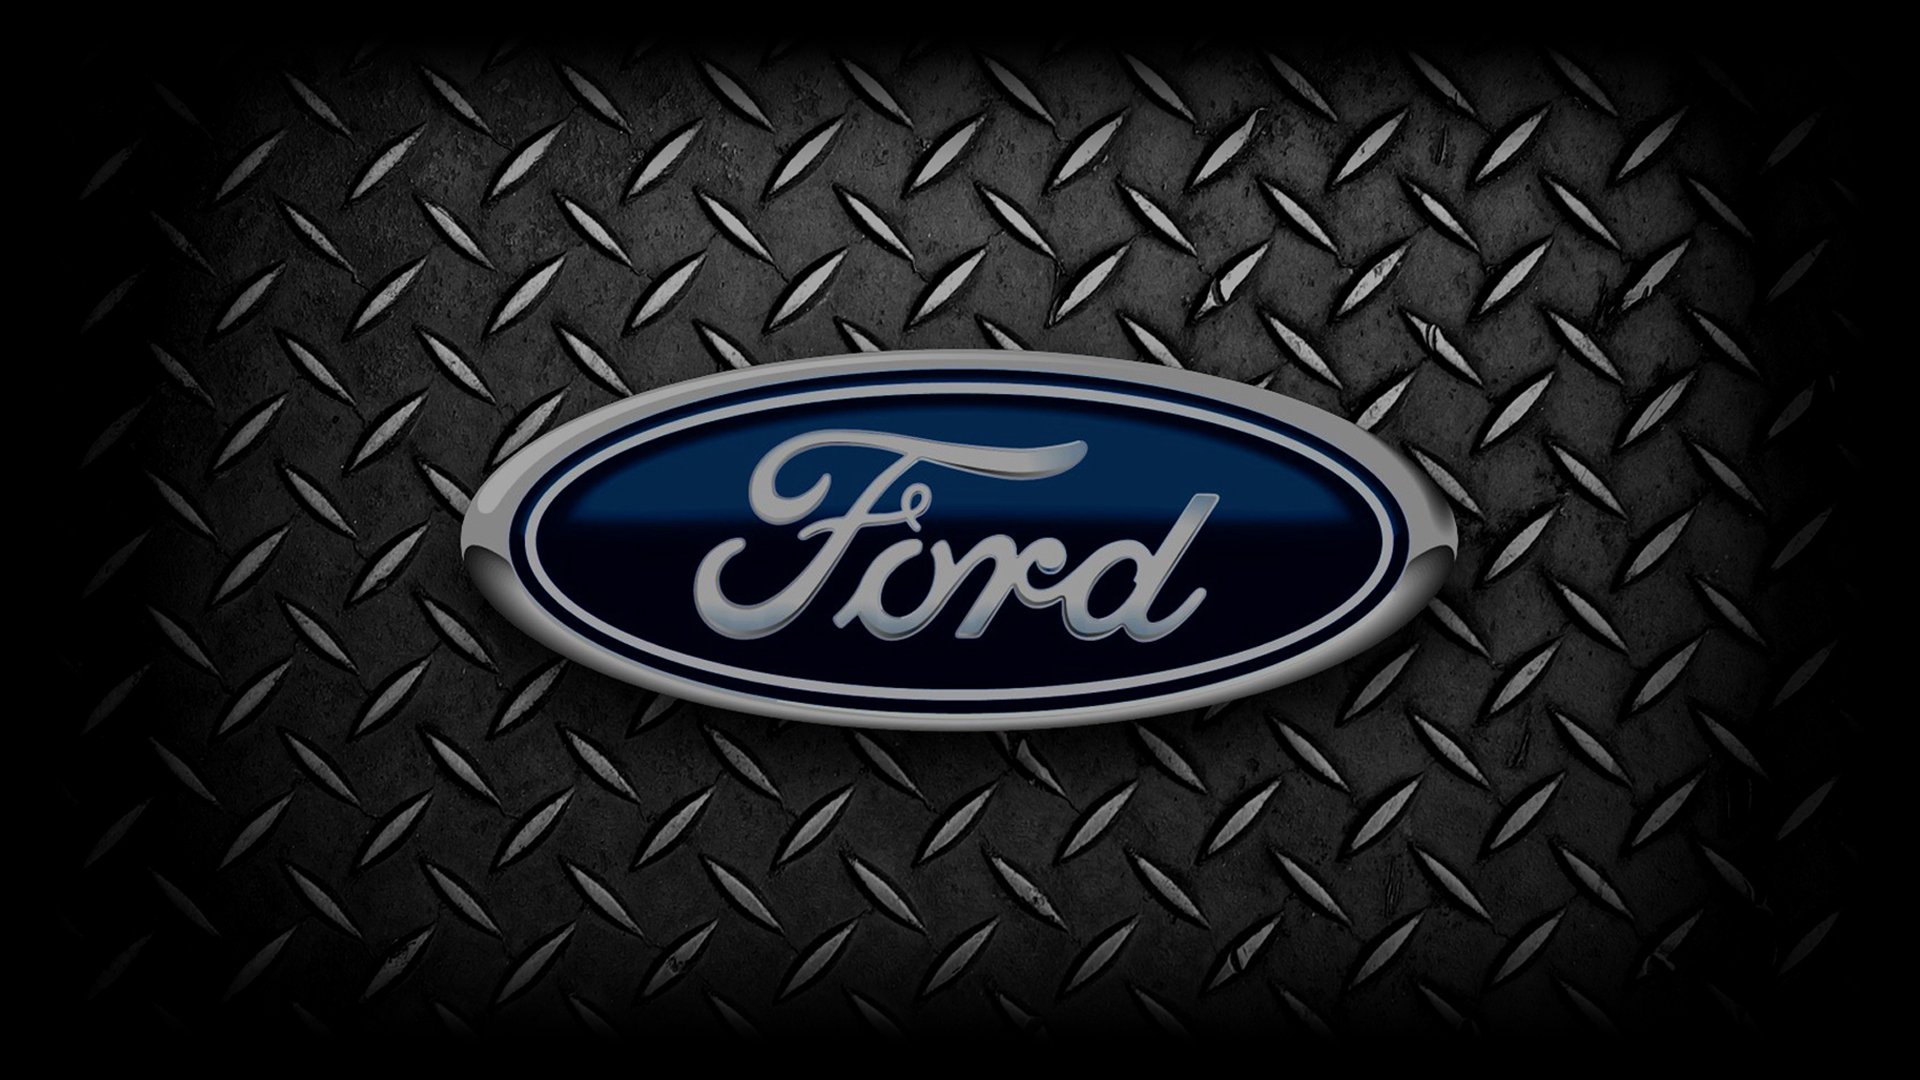 Ford Logo Wallpaper HD Backgrounds Wallpaper with 1920x1080 Resolution 1920x1080